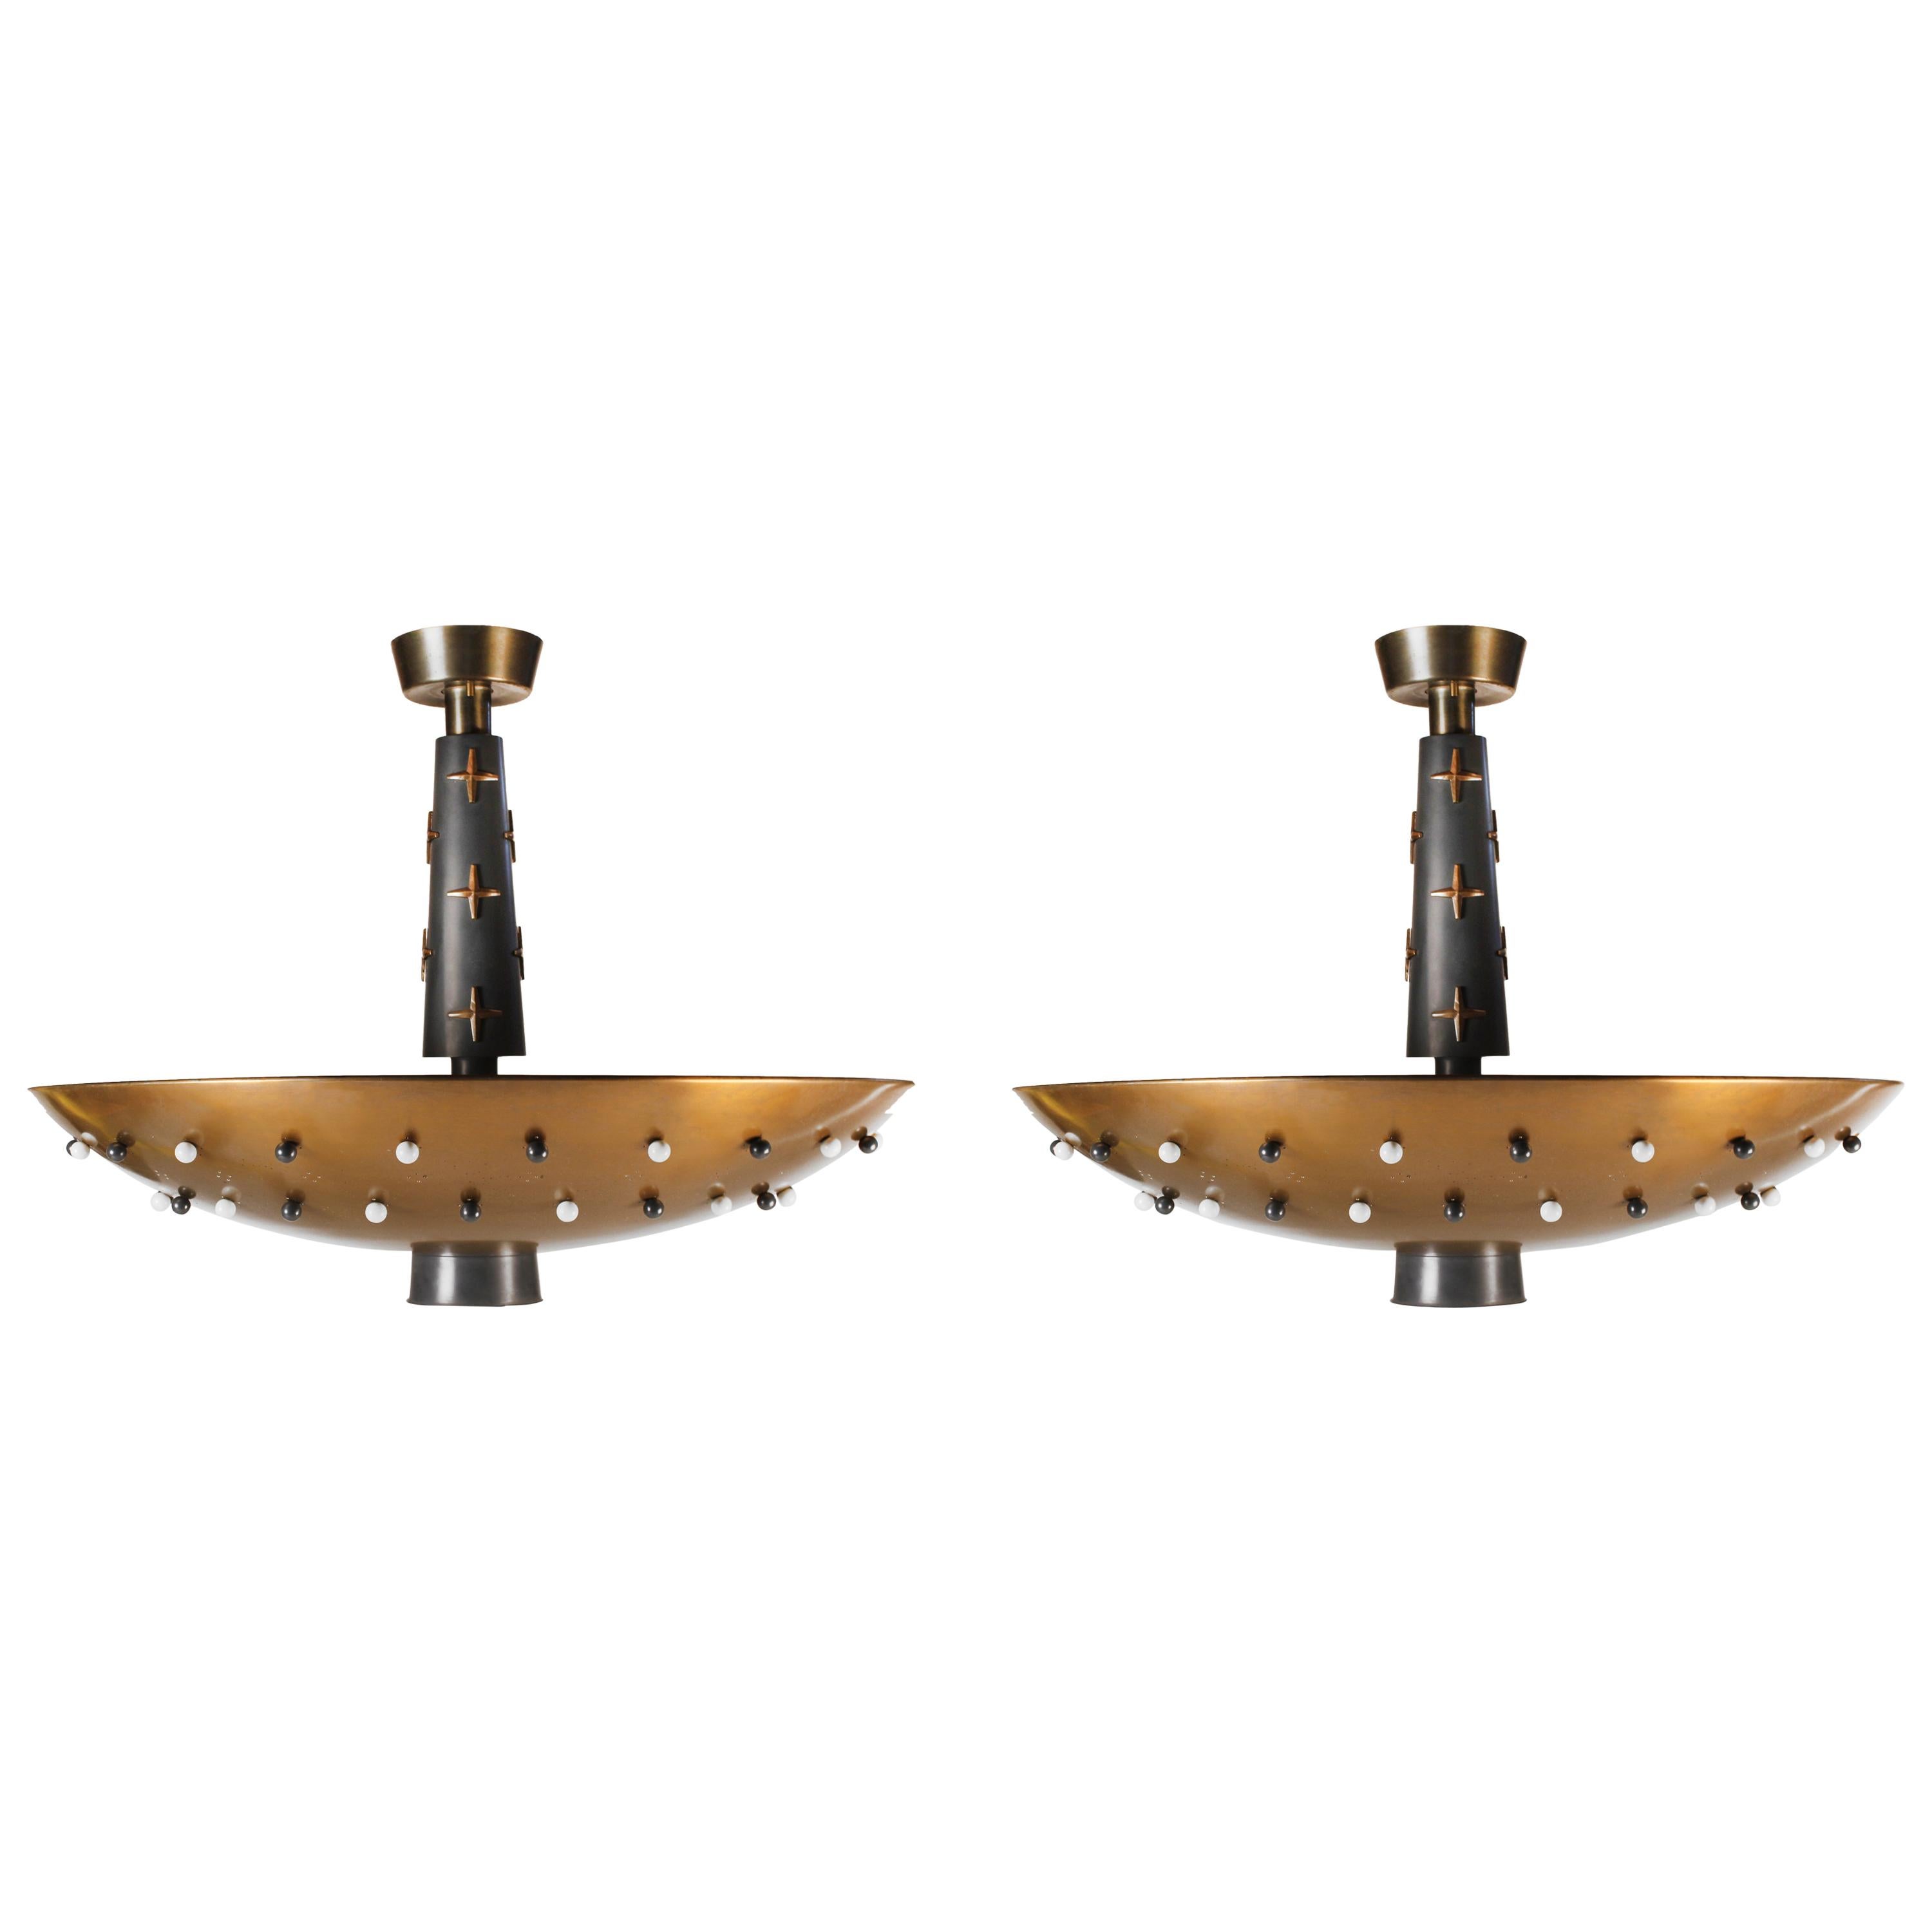 Custom Pair of Commissioned California Modernist Chandeliers by Wagner Woodruff